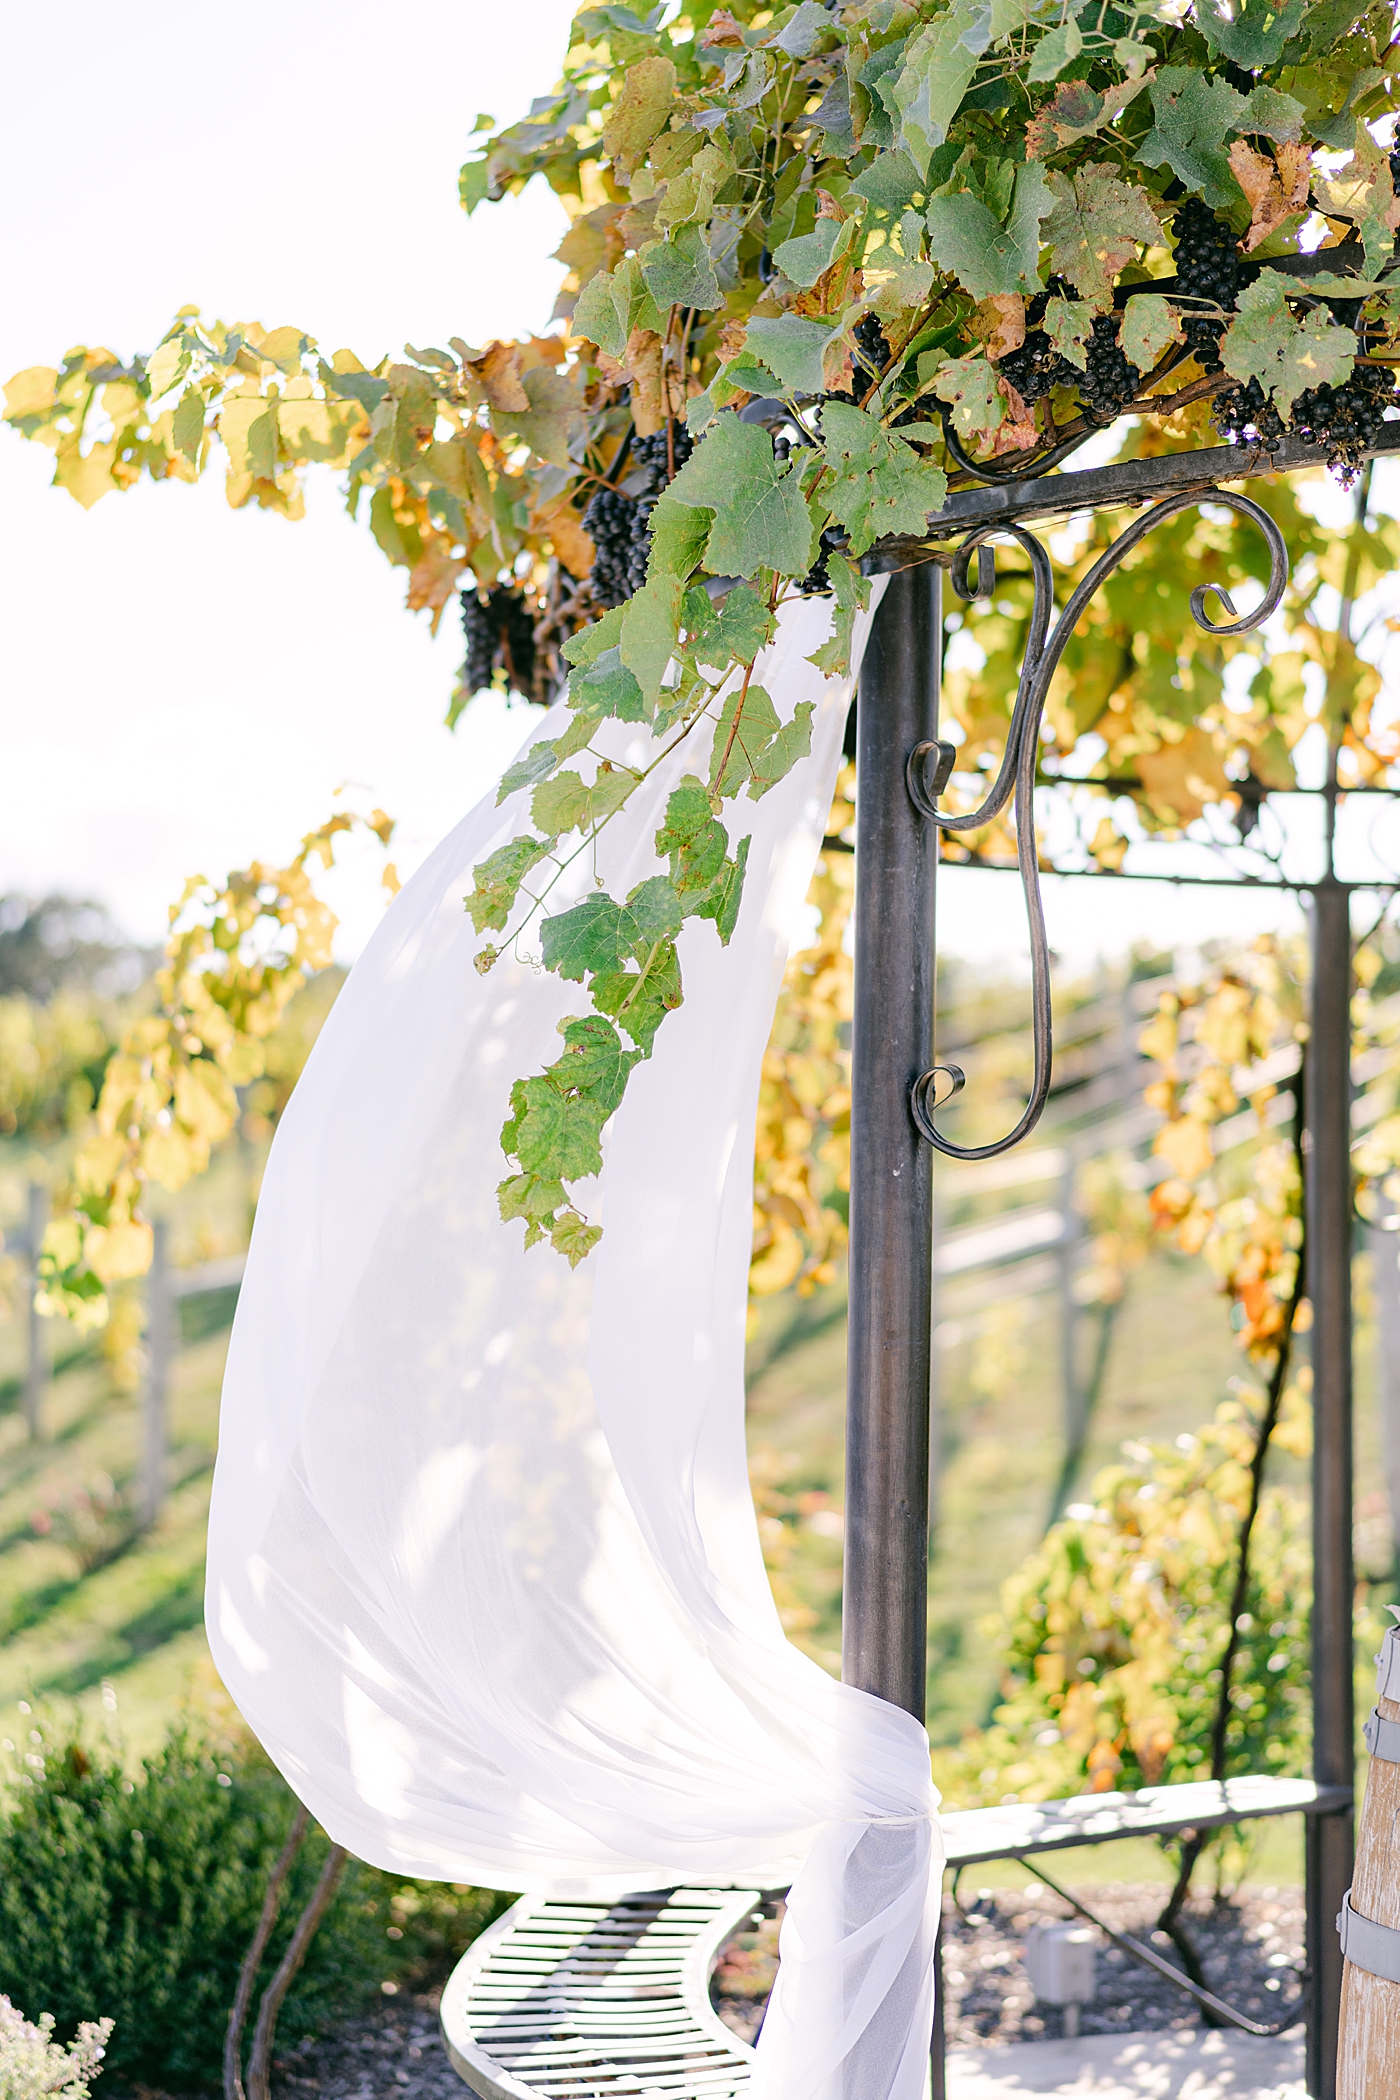 Wedding arbor lines with grape vines | Photo by Hope Helmuth Photography